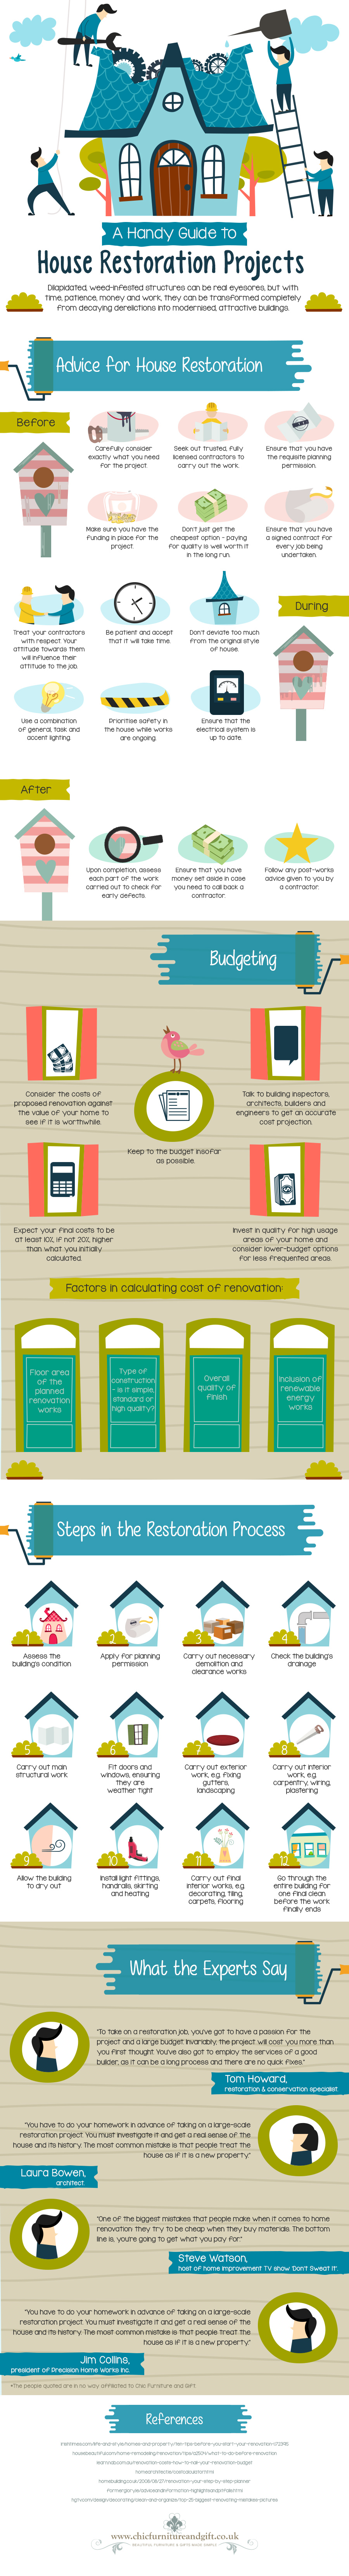 A Handy Guide to House Restoration Projects – Infographic